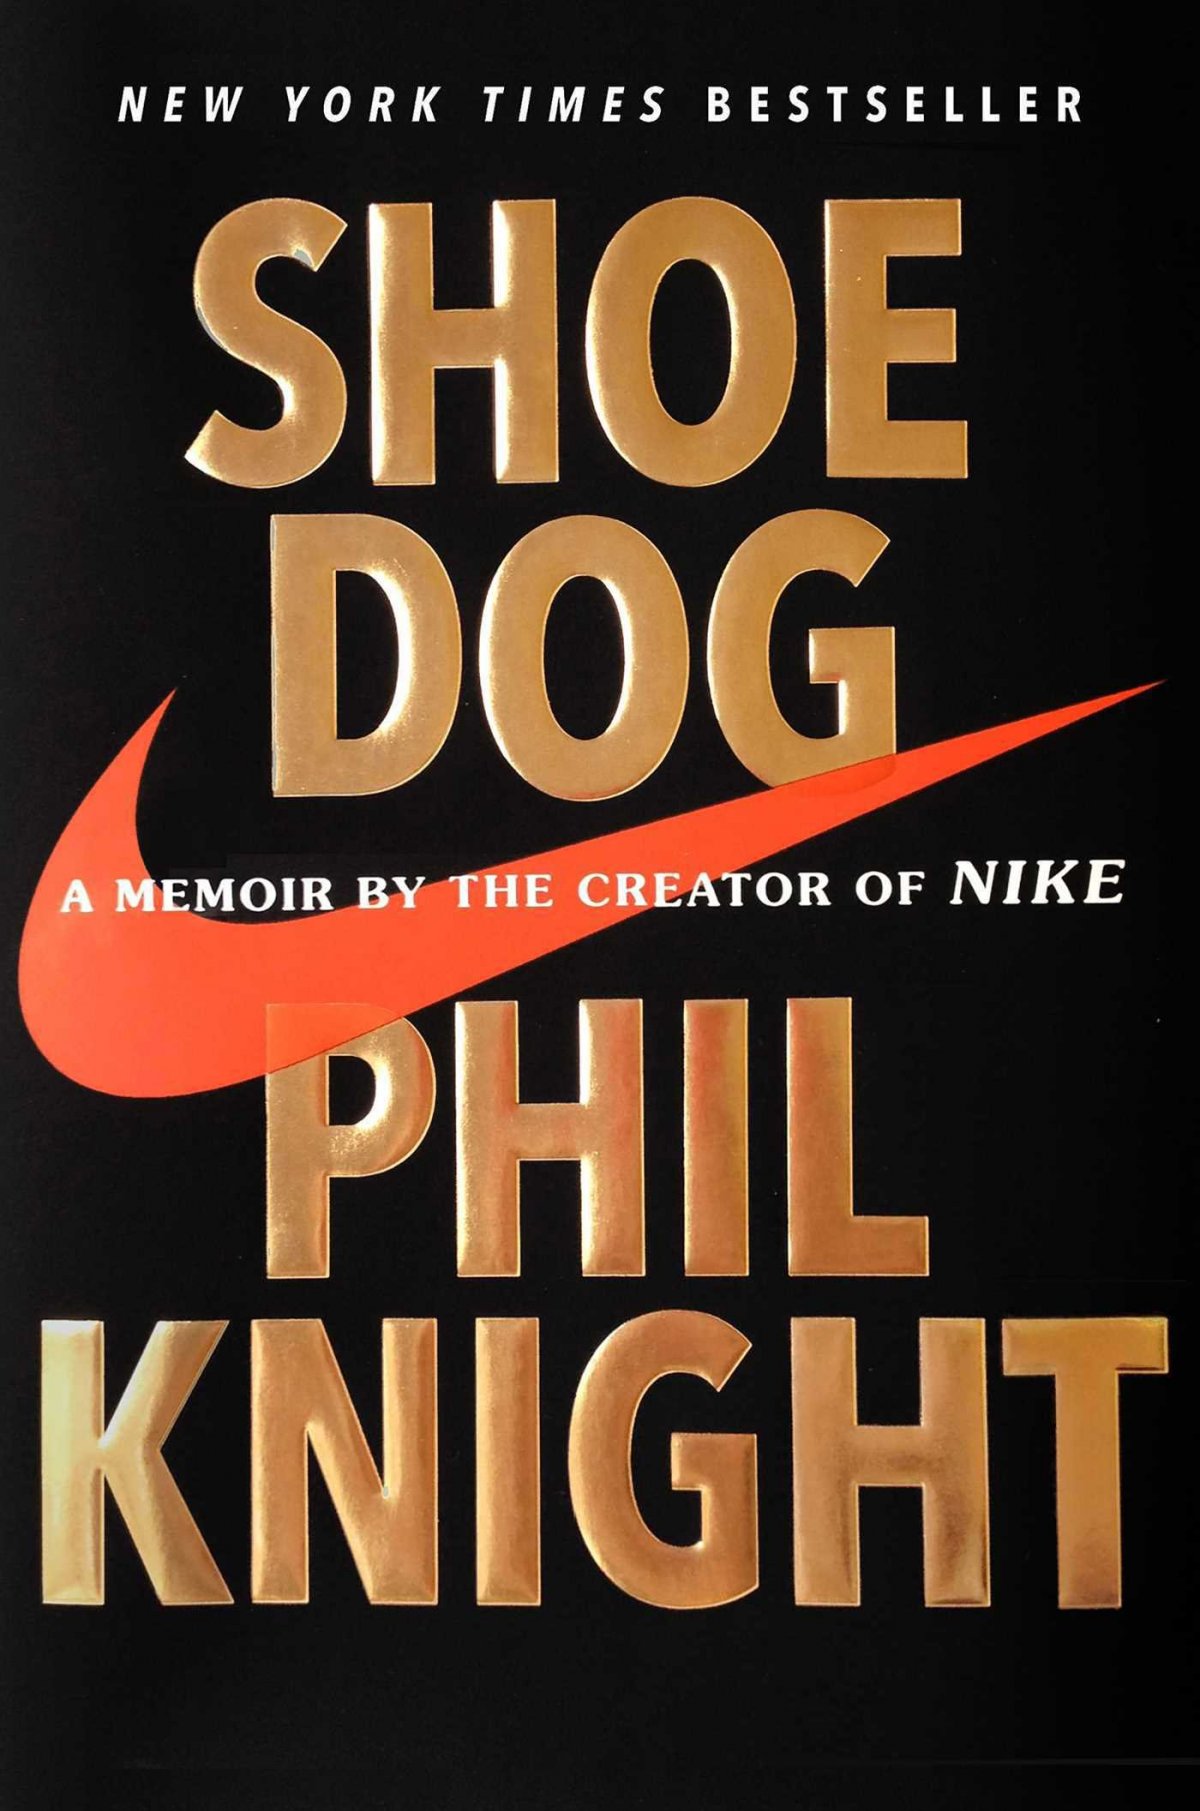 'Shoe Dog: A Memoir by the Creator of Nike' by Phil Knight